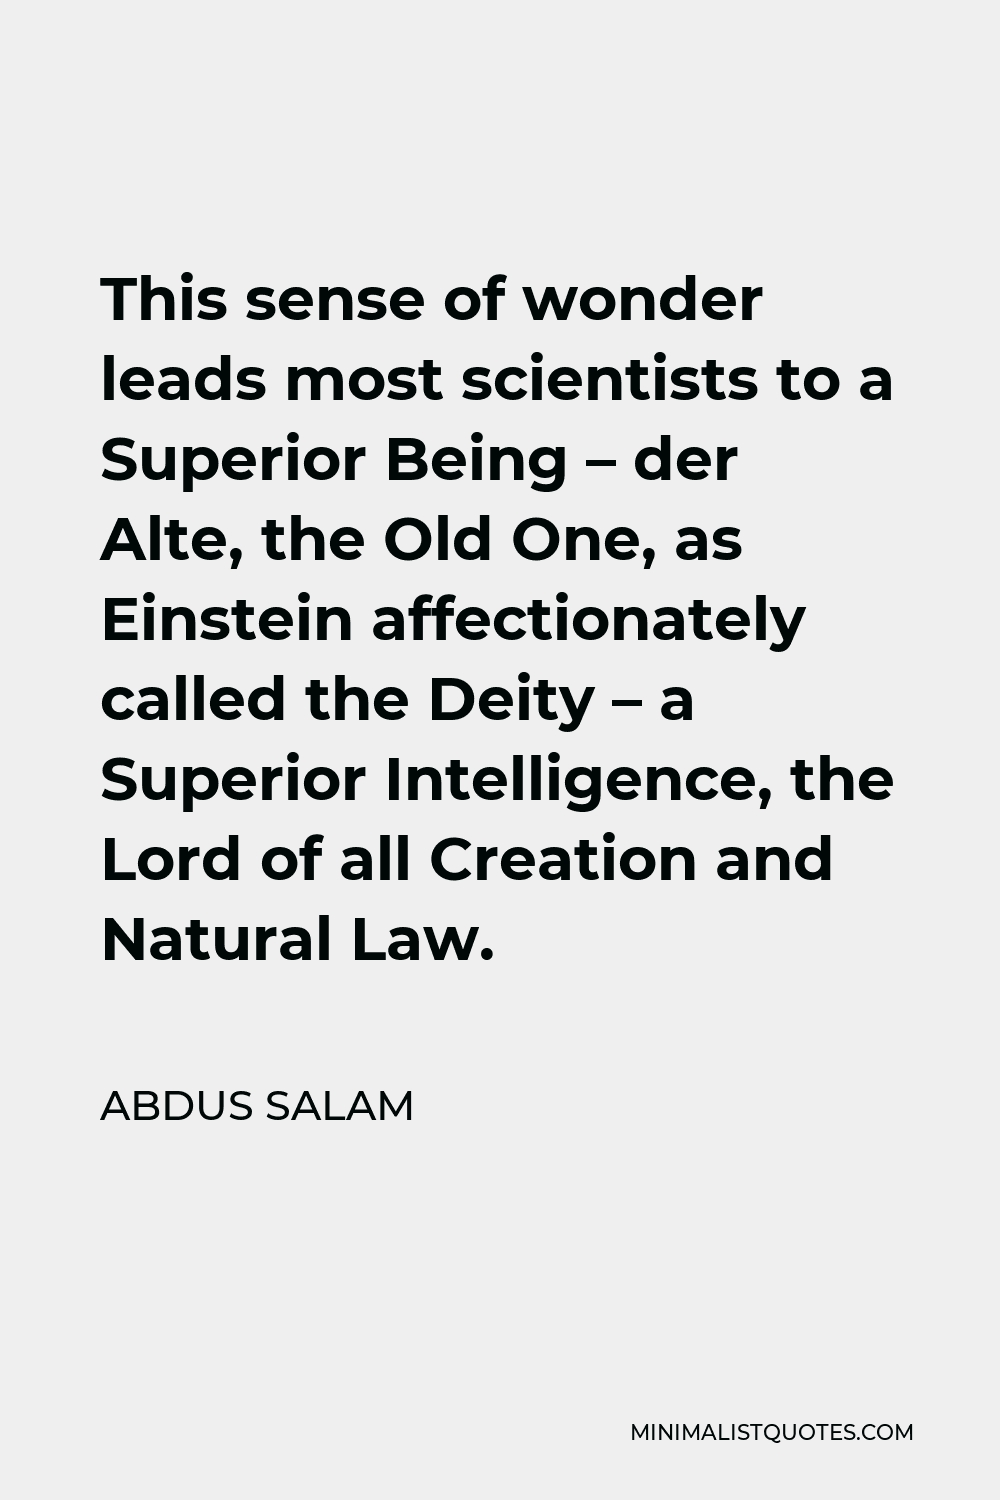 Abdus Salam Quote - This sense of wonder leads most scientists to a Superior Being – der Alte, the Old One, as Einstein affectionately called the Deity – a Superior Intelligence, the Lord of all Creation and Natural Law.